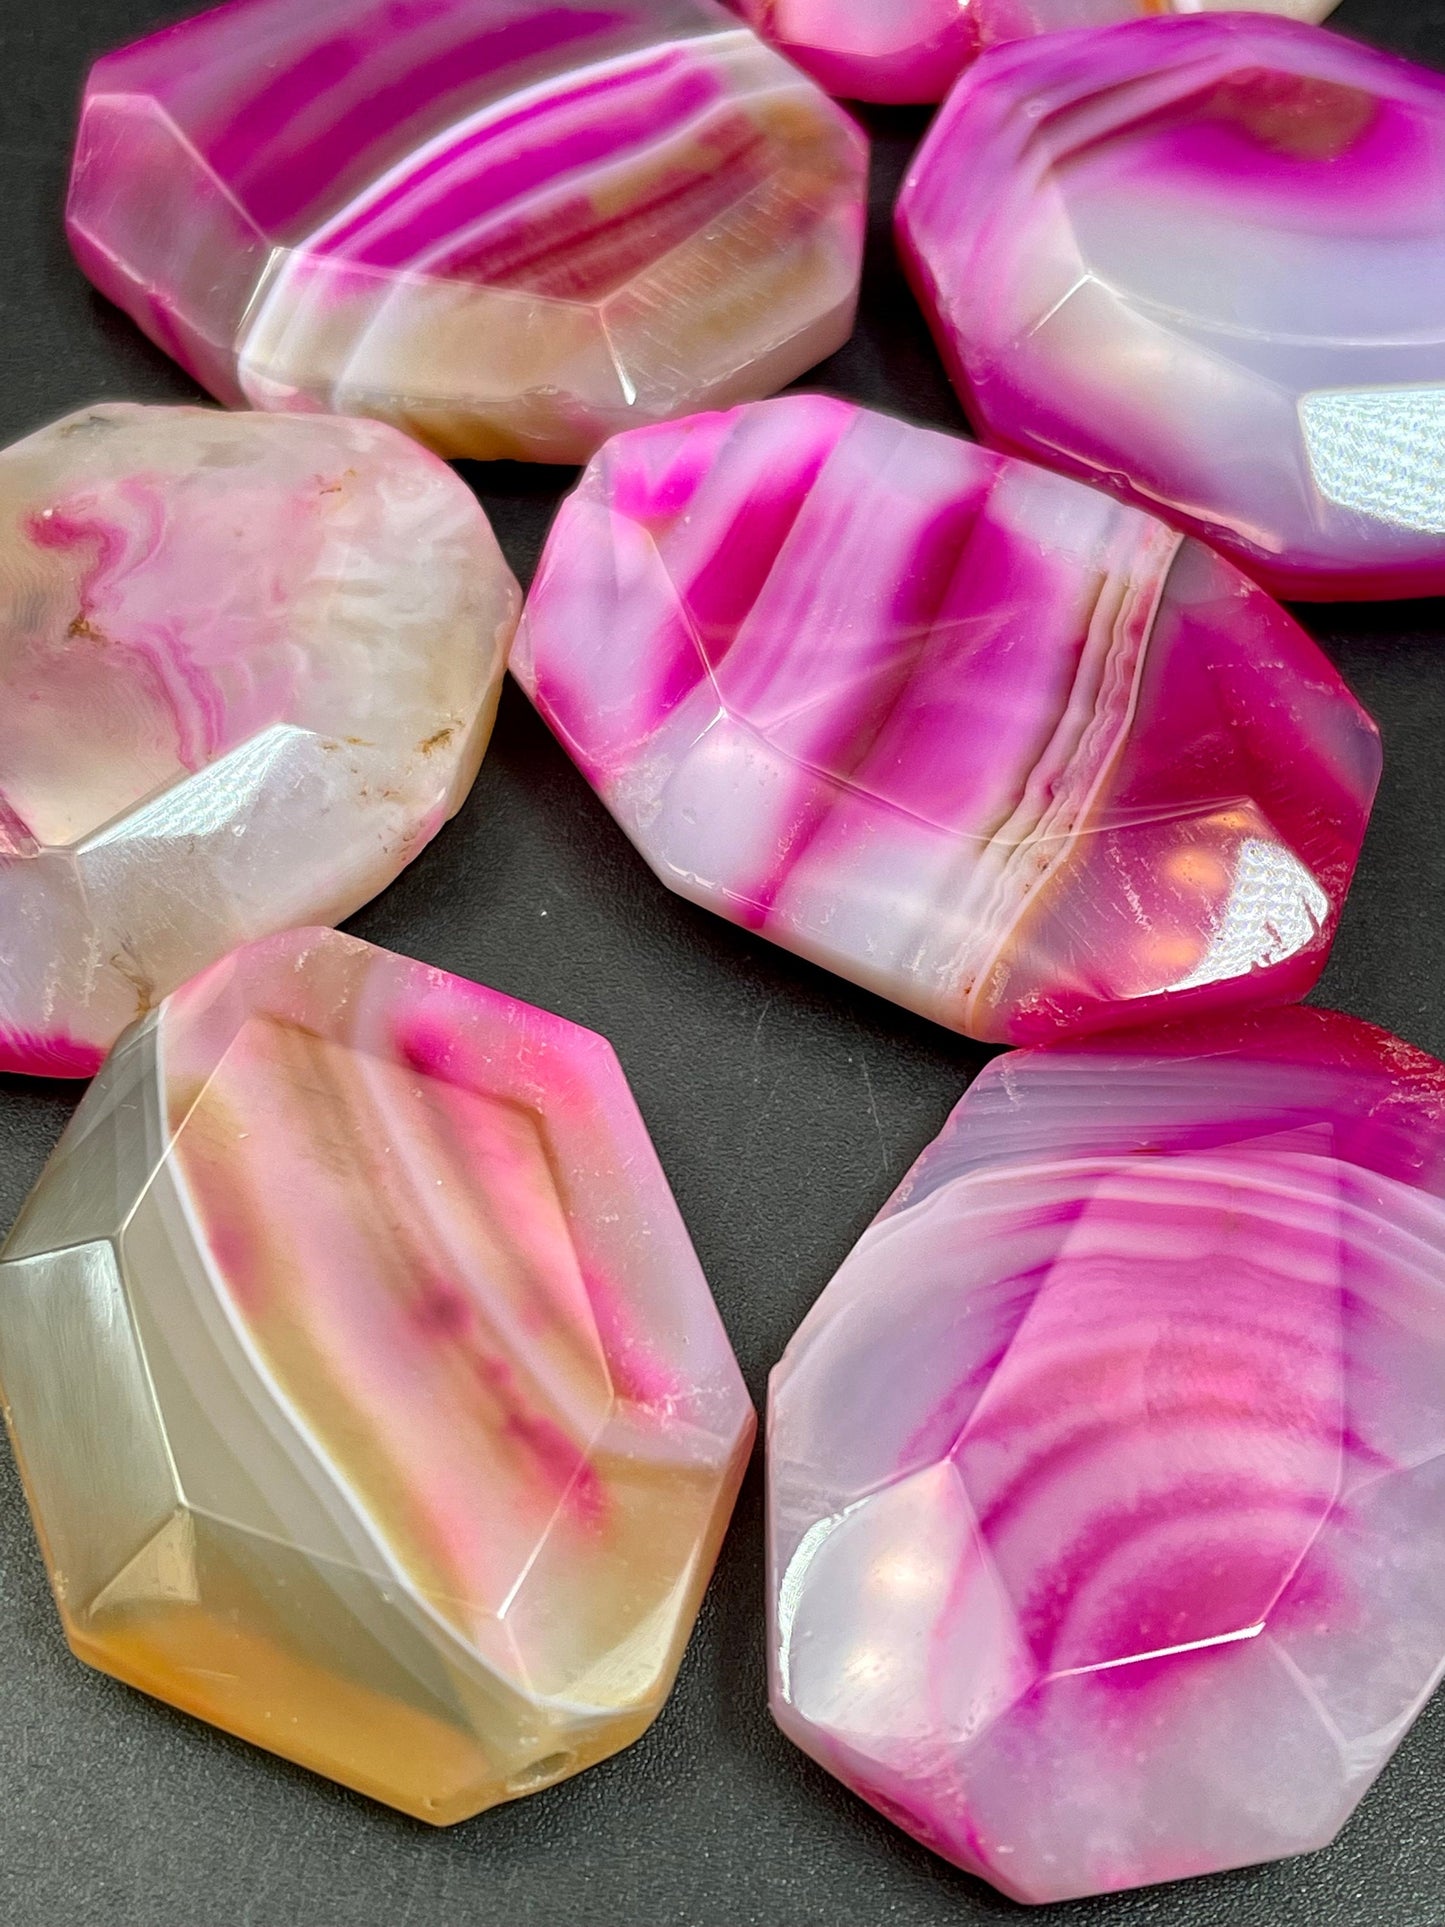 AAA Natural Botswana Agate Gemstone Bead Faceted 24x34mm Octagon Oval Shape, Gorgeous Pink Color Botswana Agate LOOSE BEADS